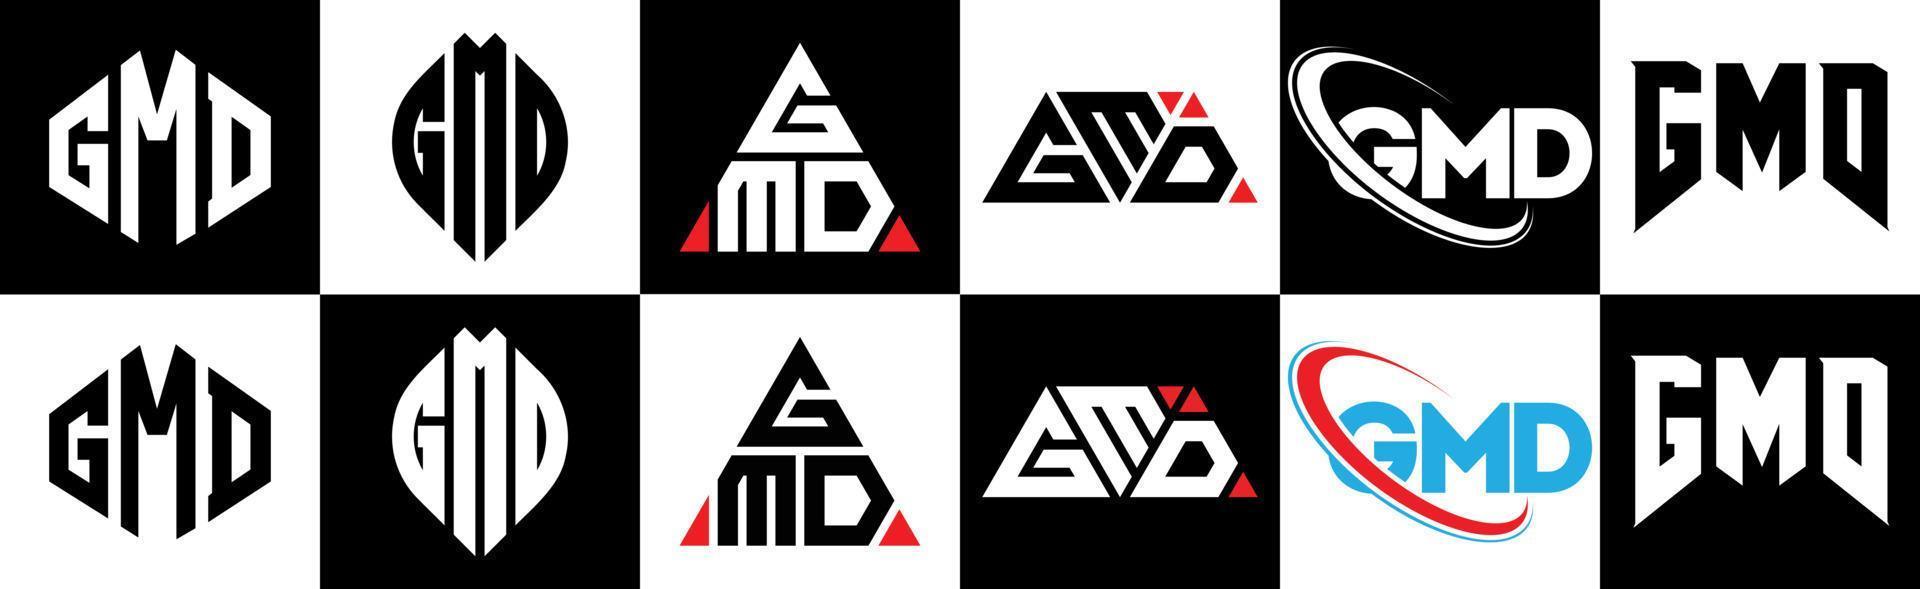 GMD letter logo design in six style. GMD polygon, circle, triangle, hexagon, flat and simple style with black and white color variation letter logo set in one artboard. GMD minimalist and classic logo vector